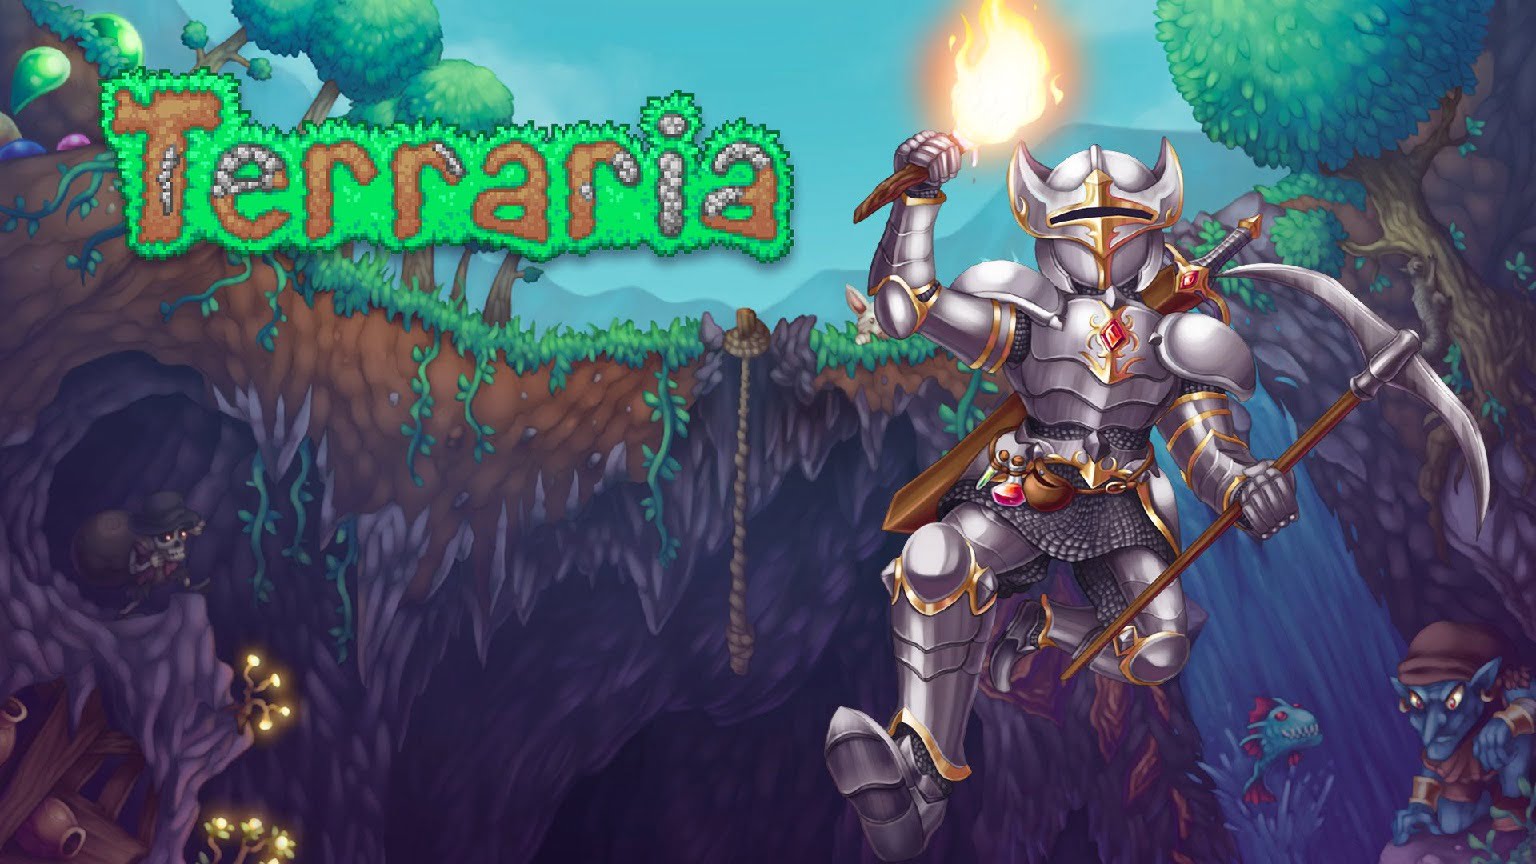 Terraria has managed to sell more than 35 million copies